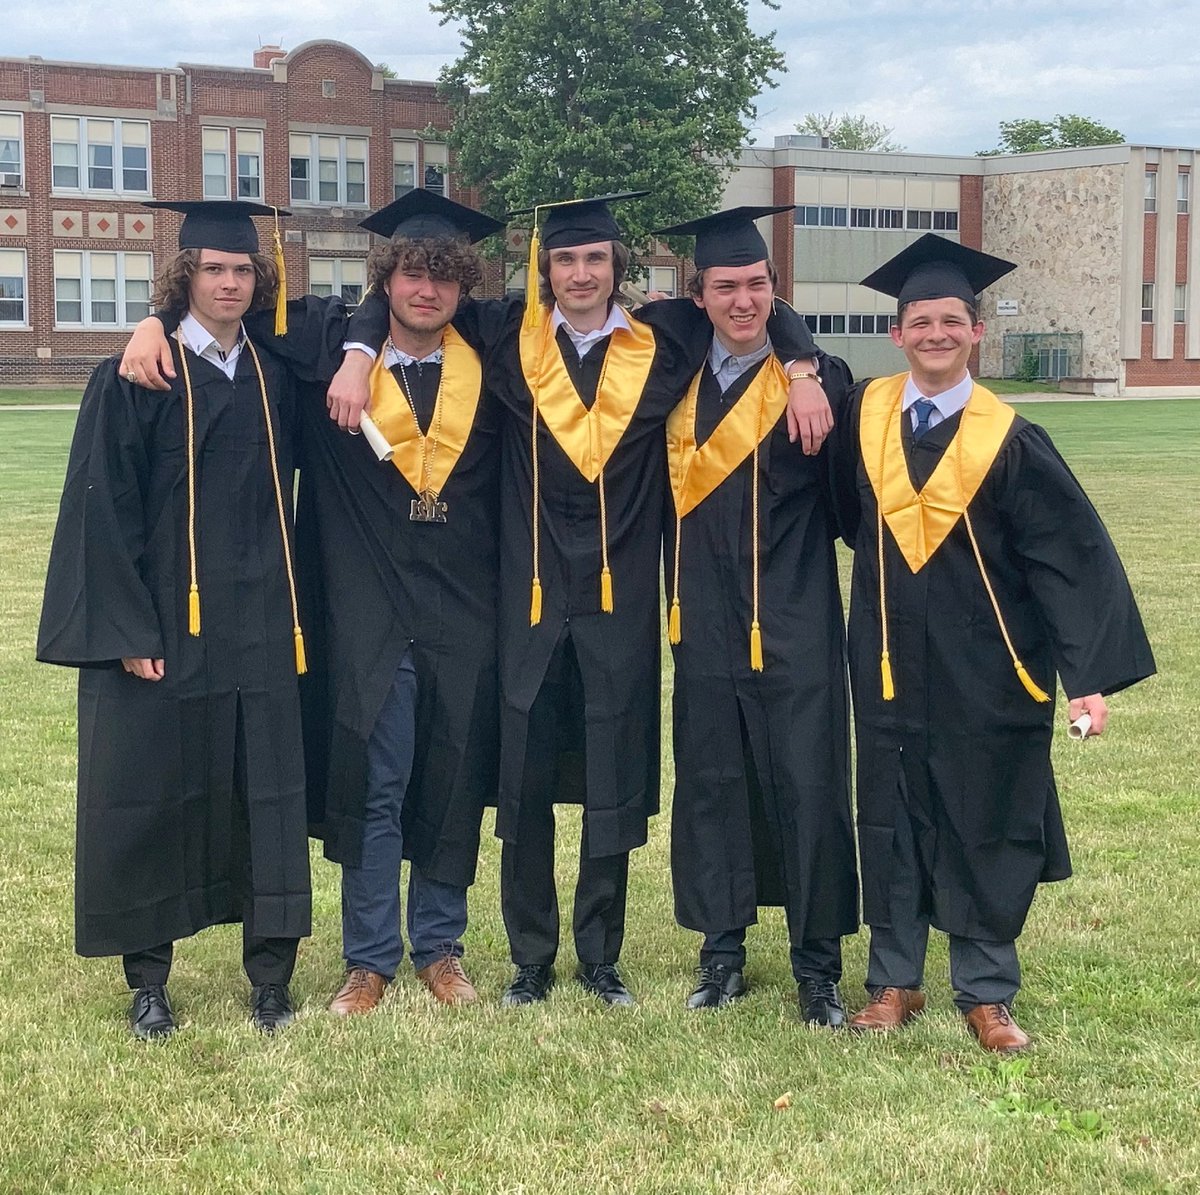 Congratulations to our 2021 grads ( not pictured is Cody). We wish you tremendous success in your future endeavours! Thank you for your wonderful contributions to our team!